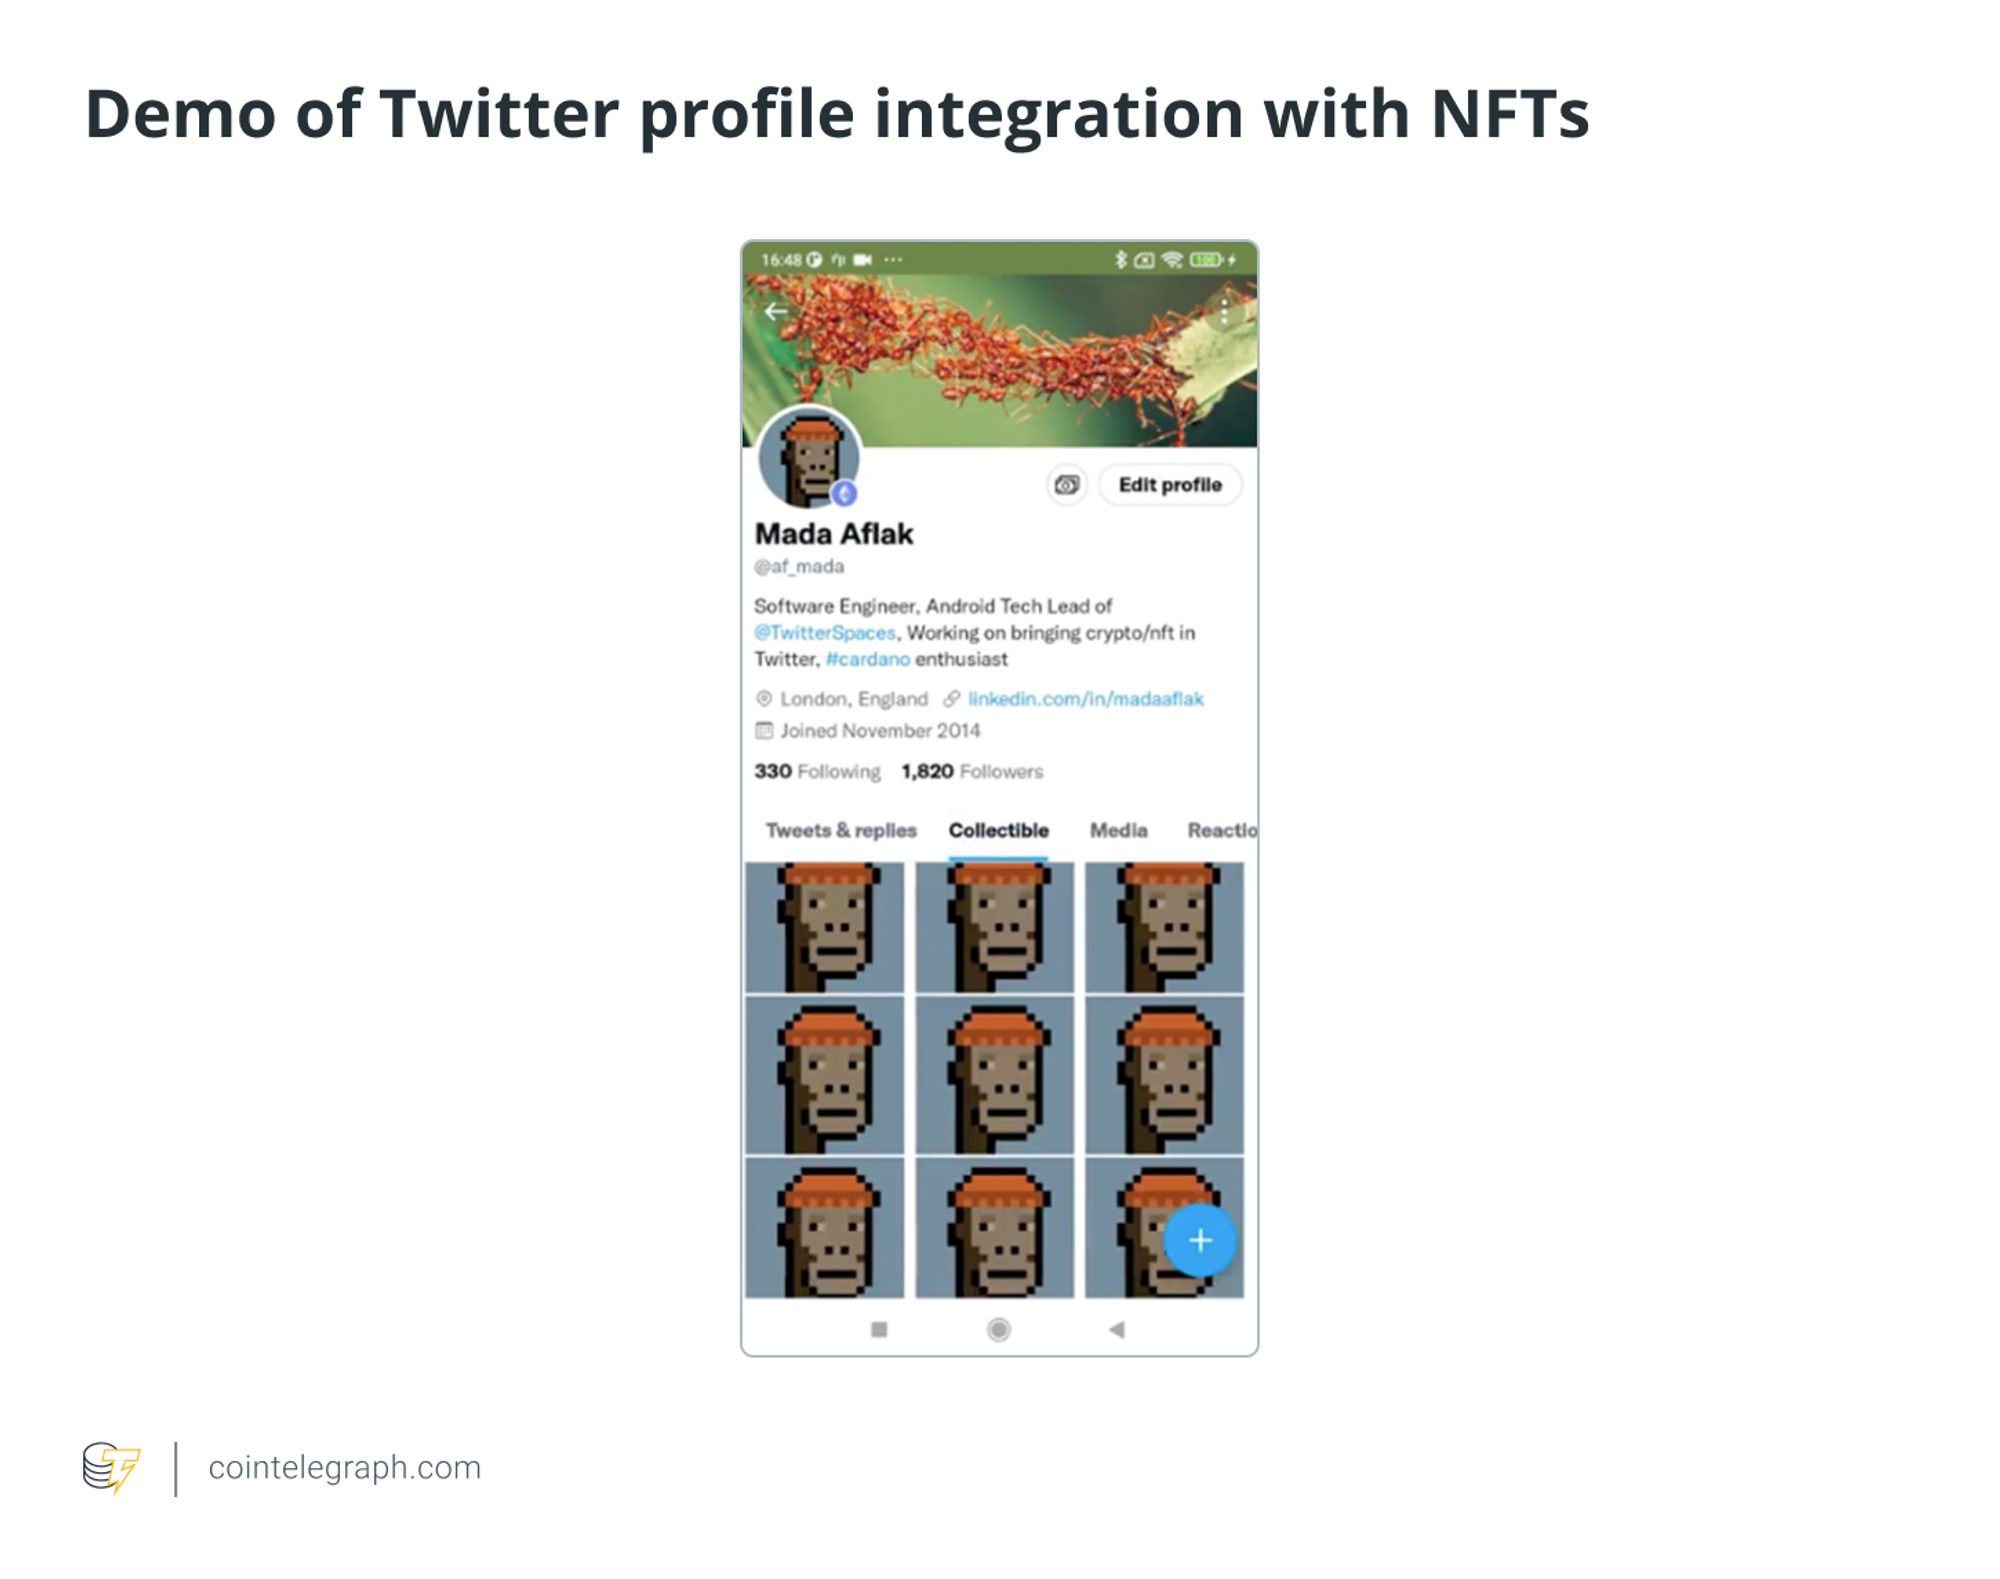 NFTs as micro-social networks: The path to crypto adoption